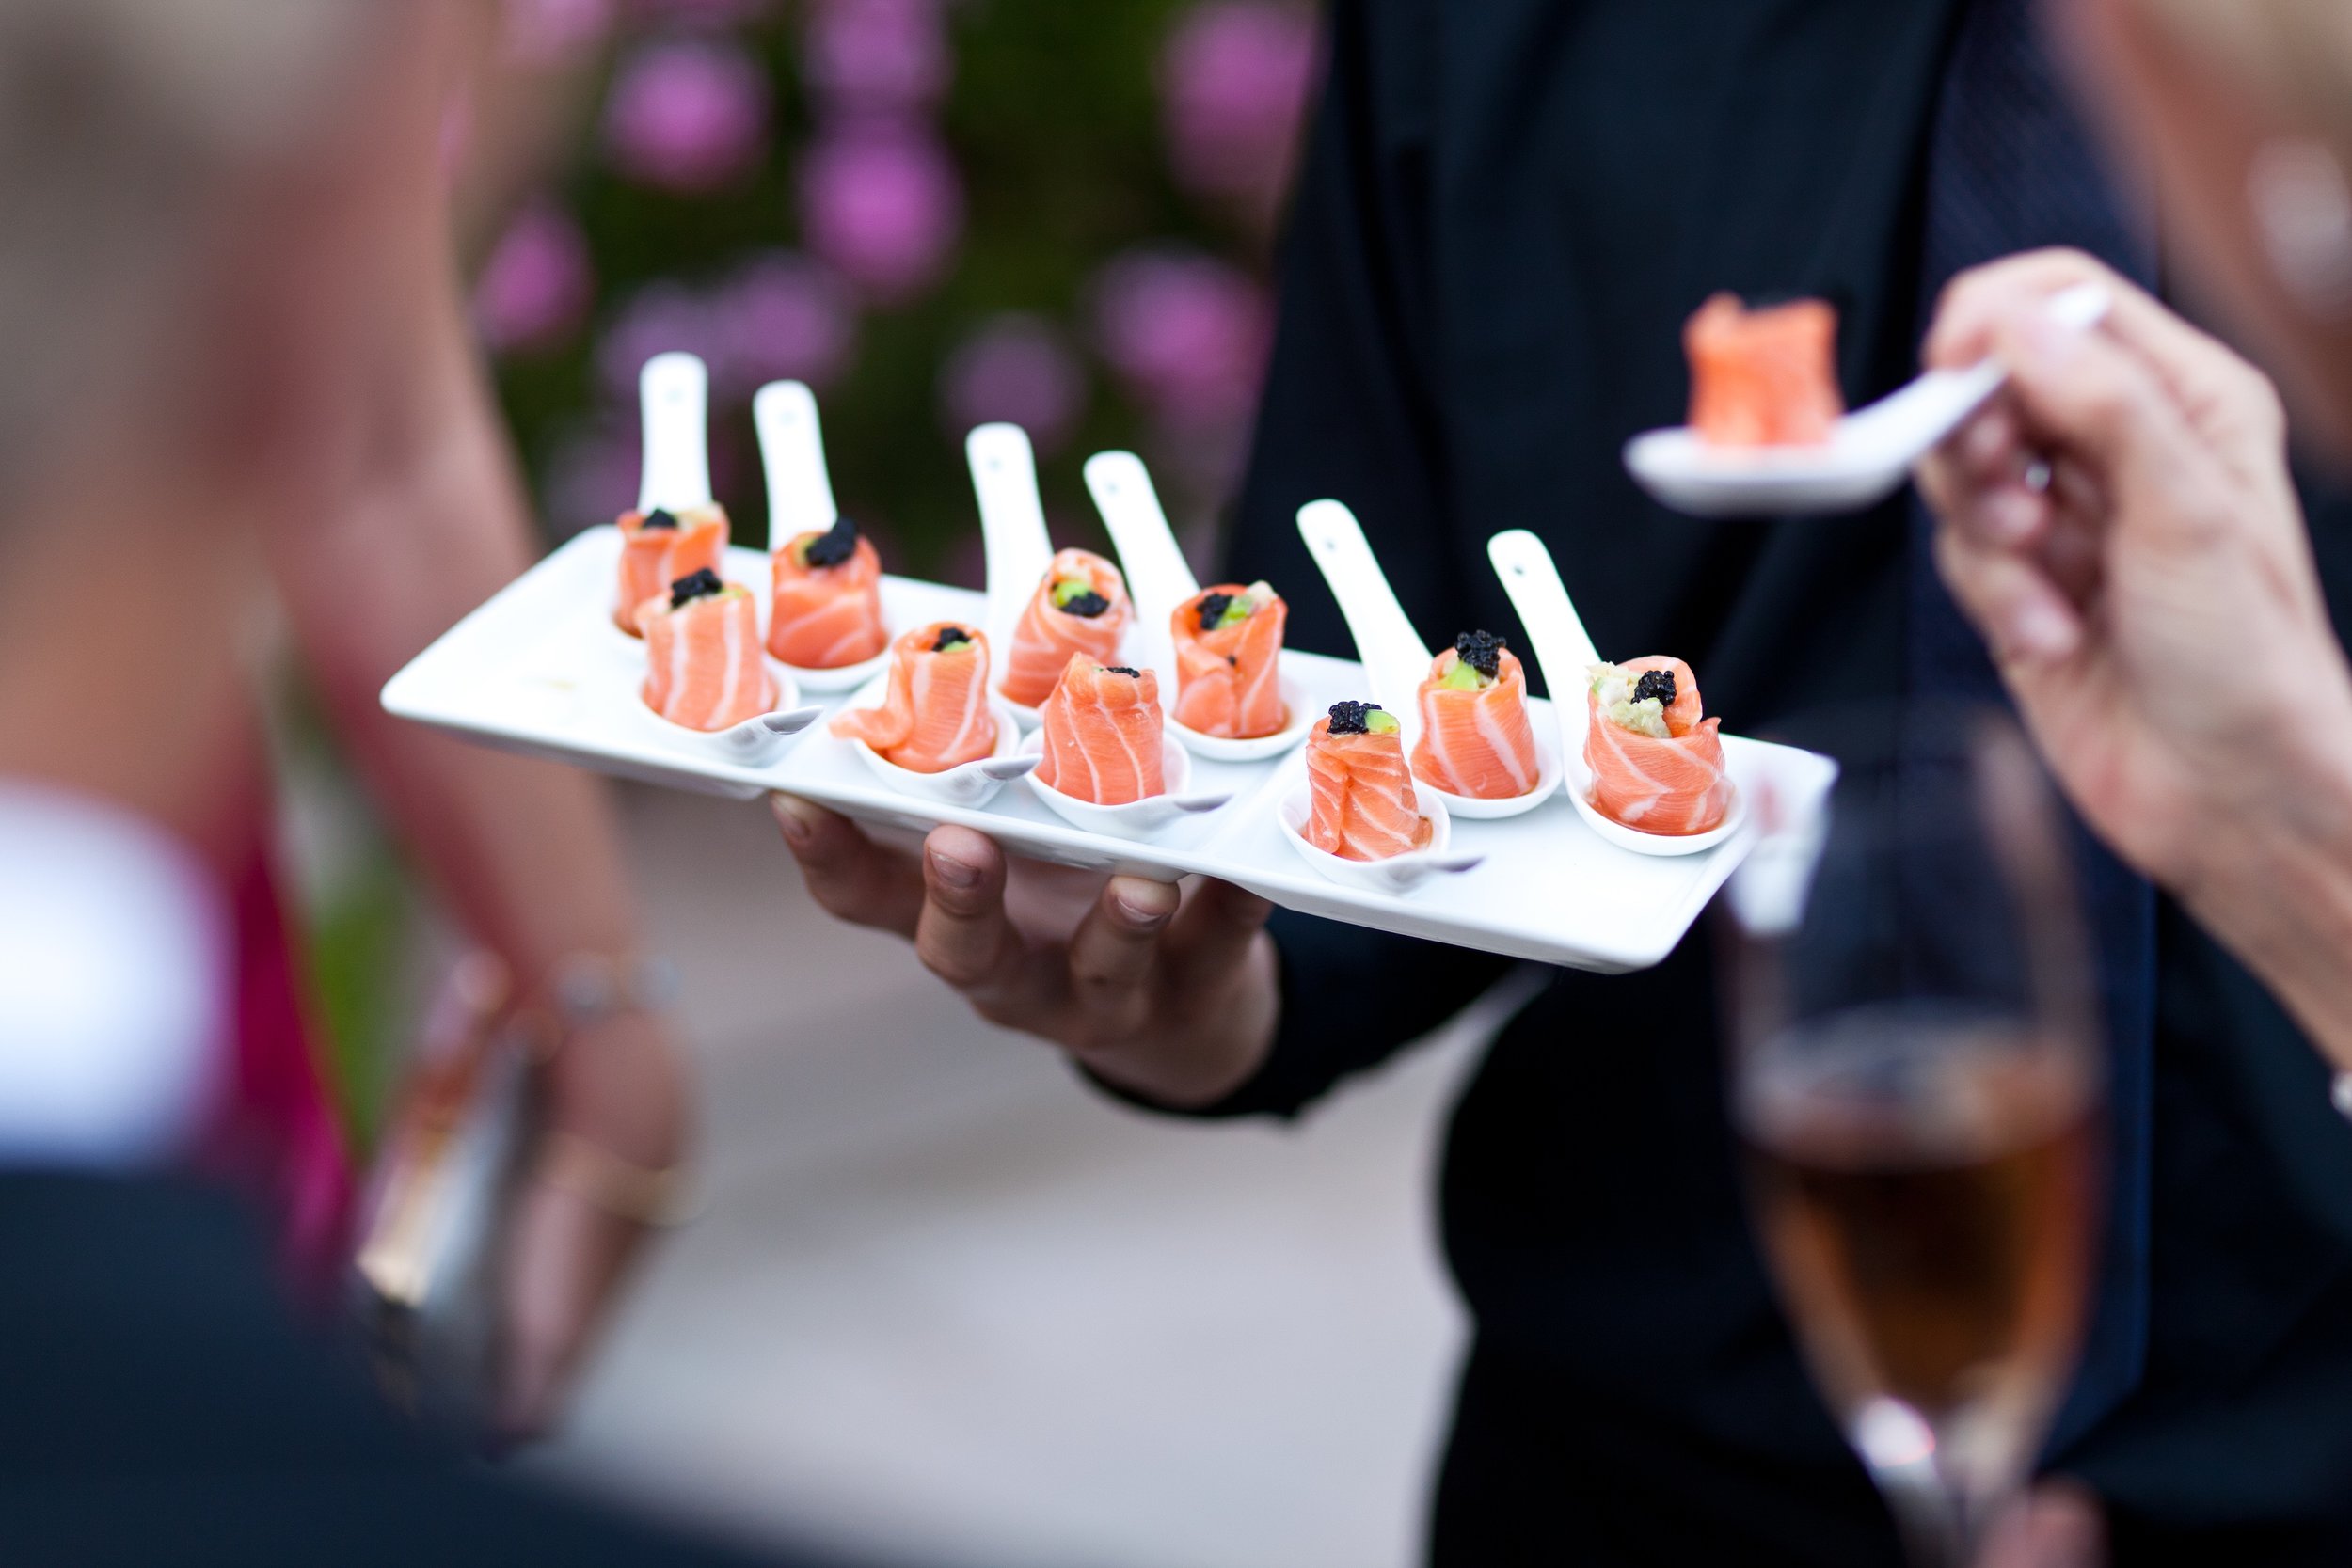 SMOKED SALMON HORS D'OEUVRES